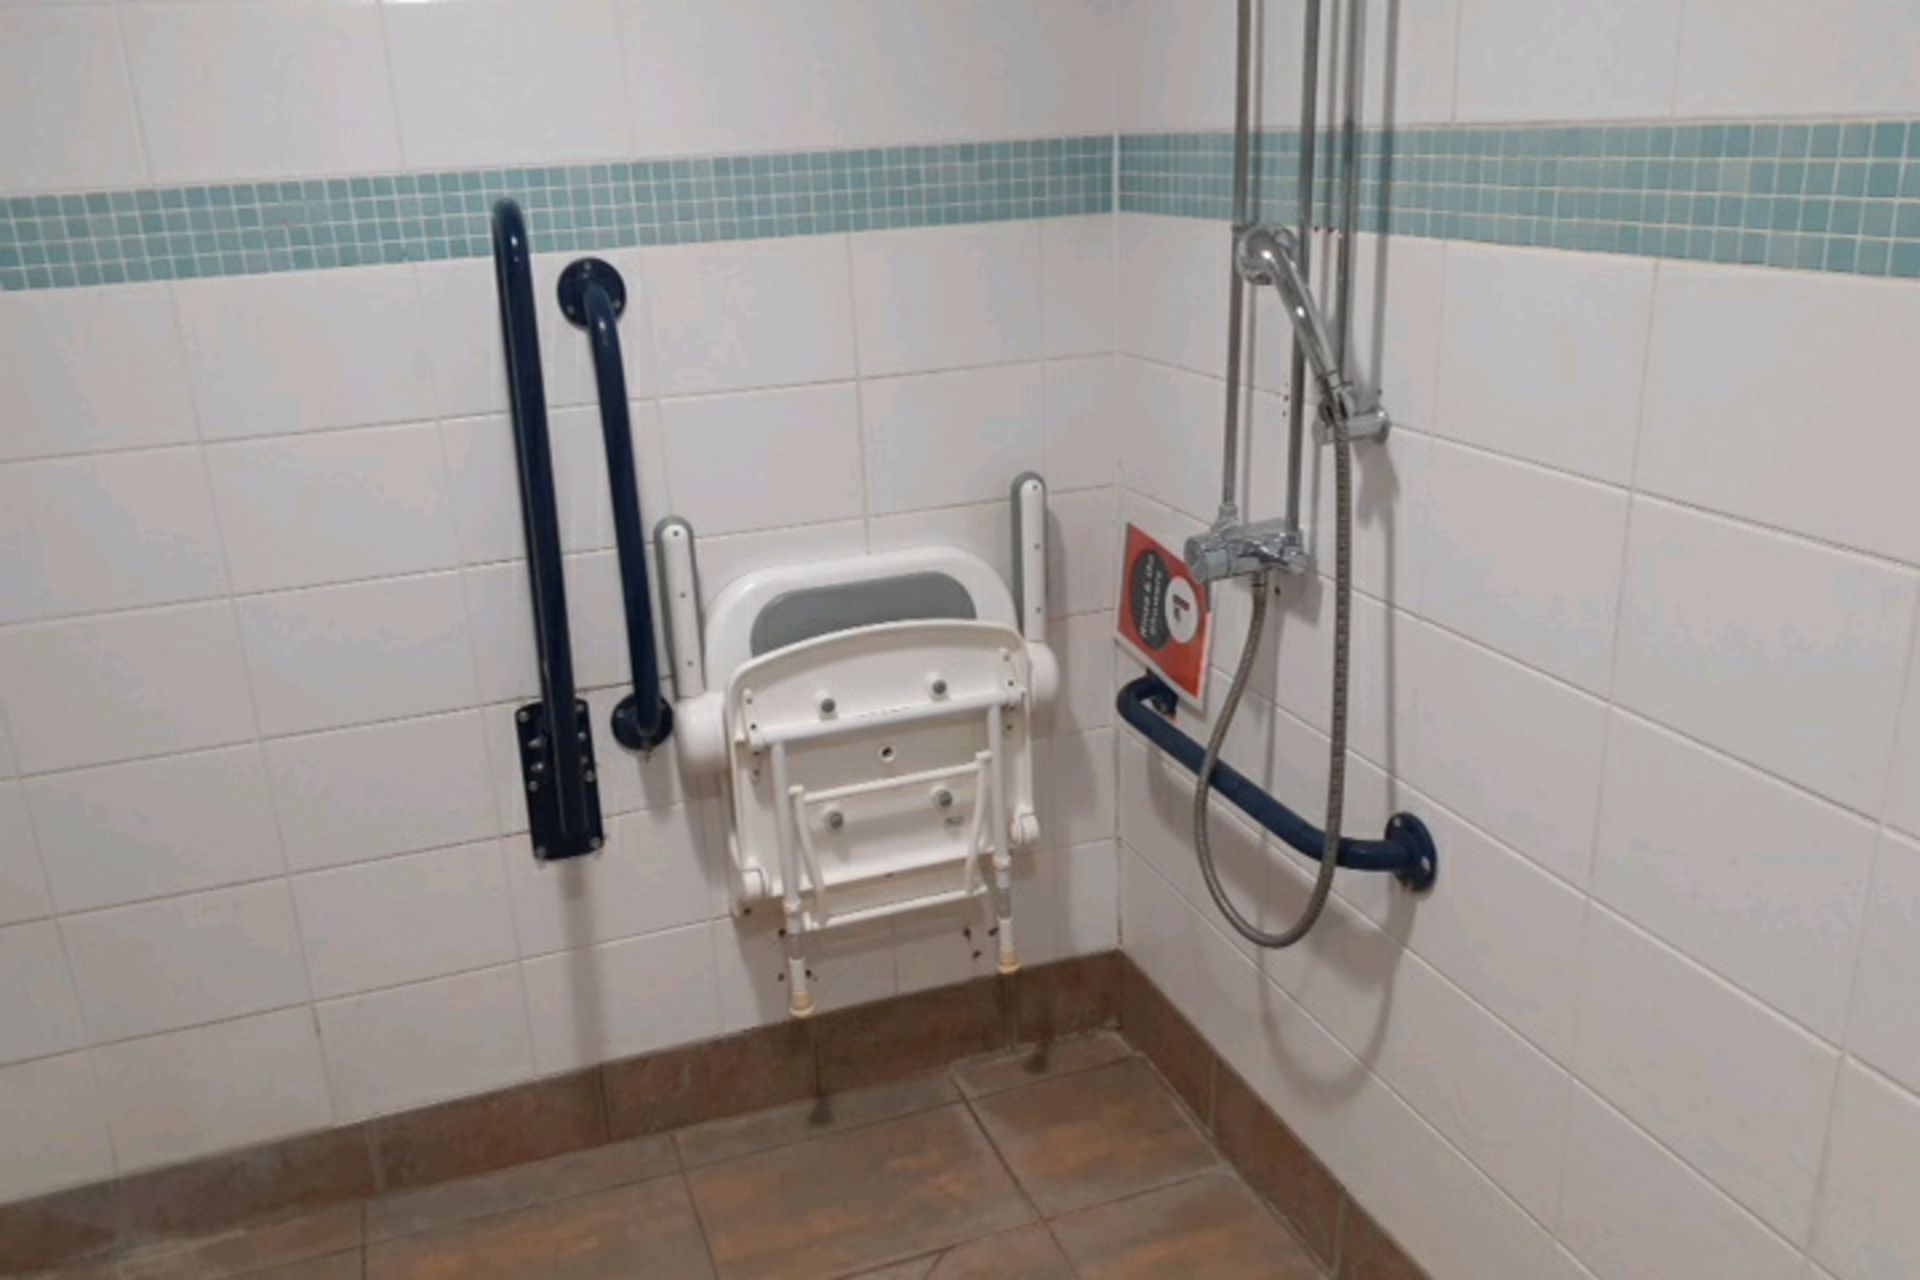 Accessible toilet - Image 2 of 3